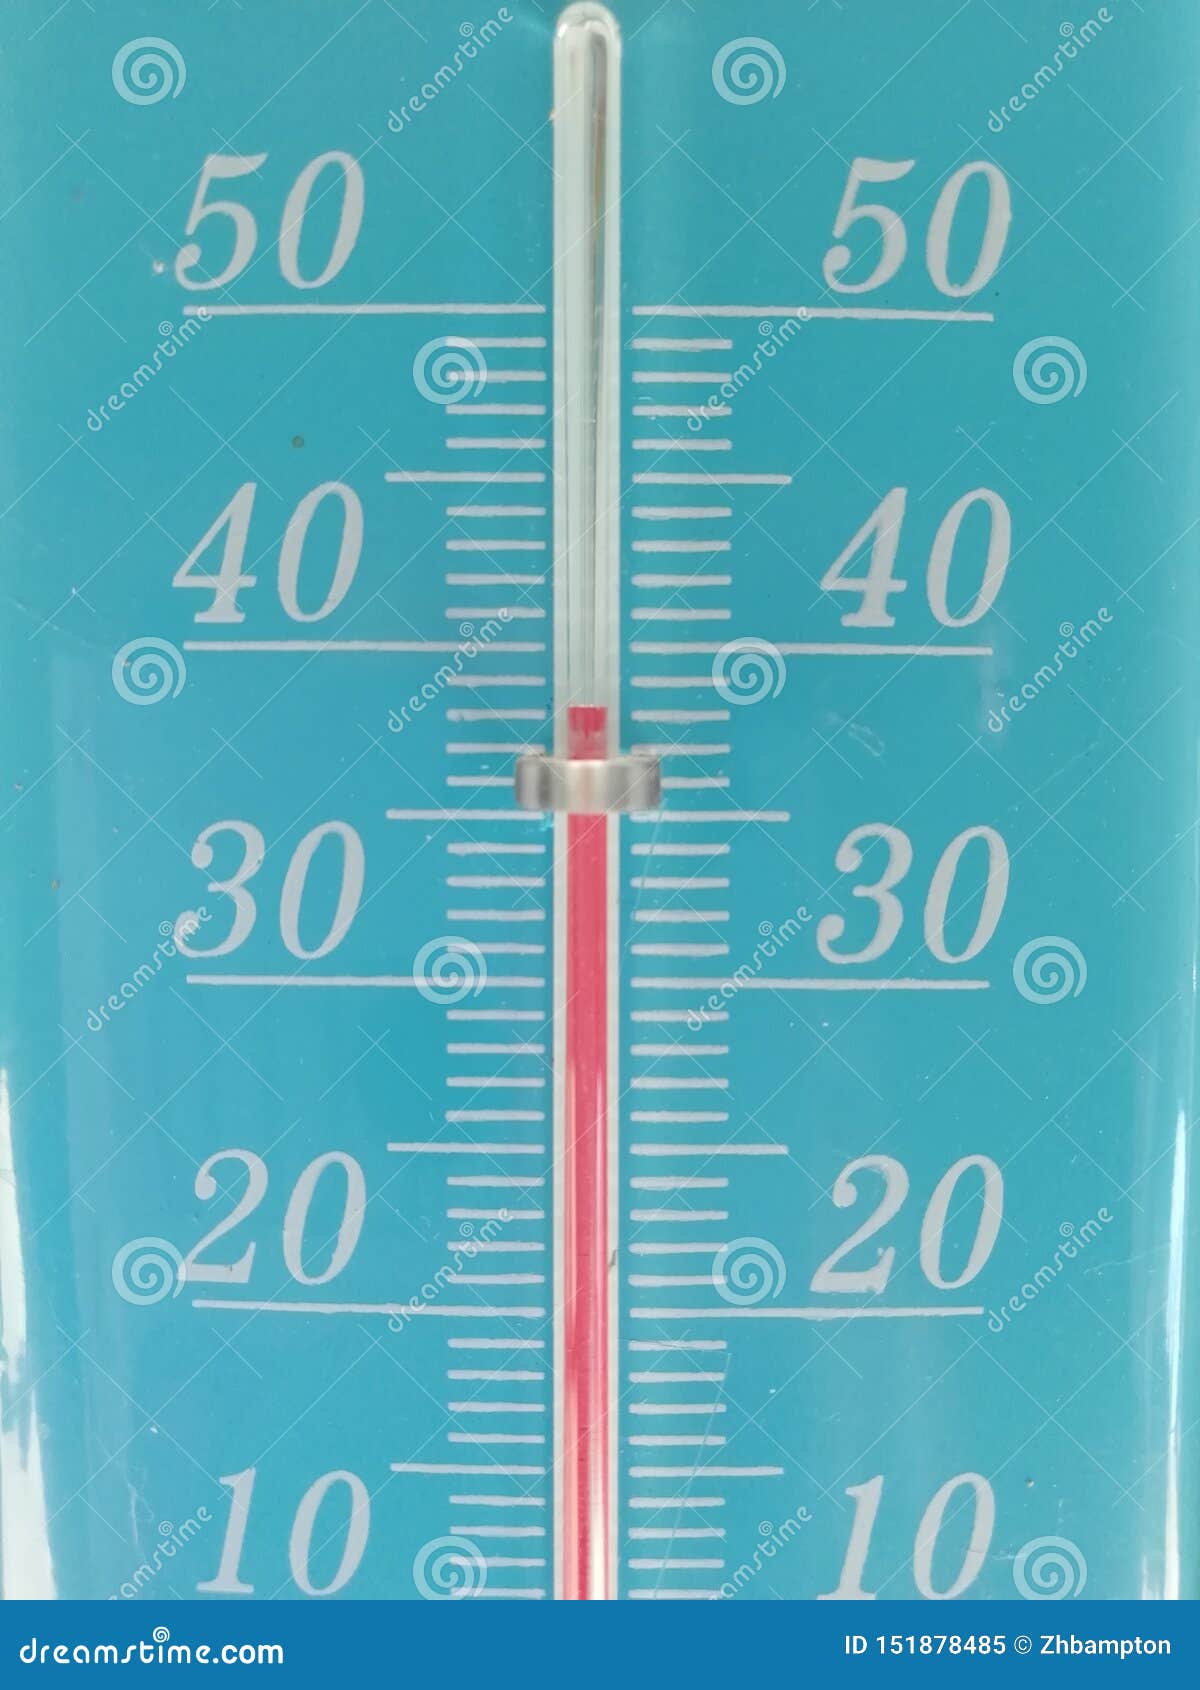 thermometer showing 38 degrees centigrade